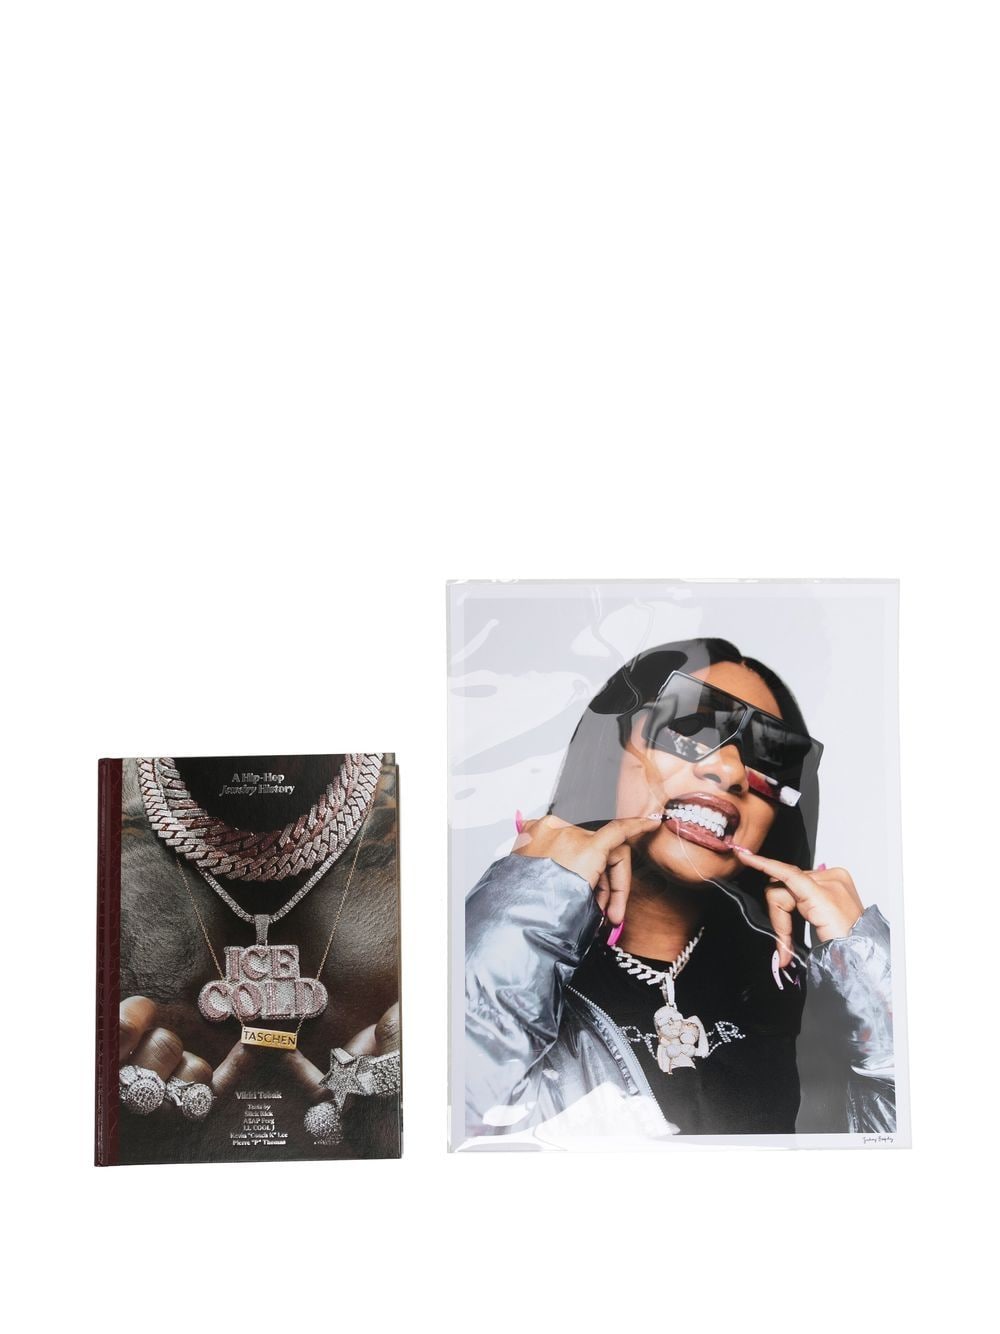 Shop Taschen Ice Cold. A Hip-hop Jewelry History